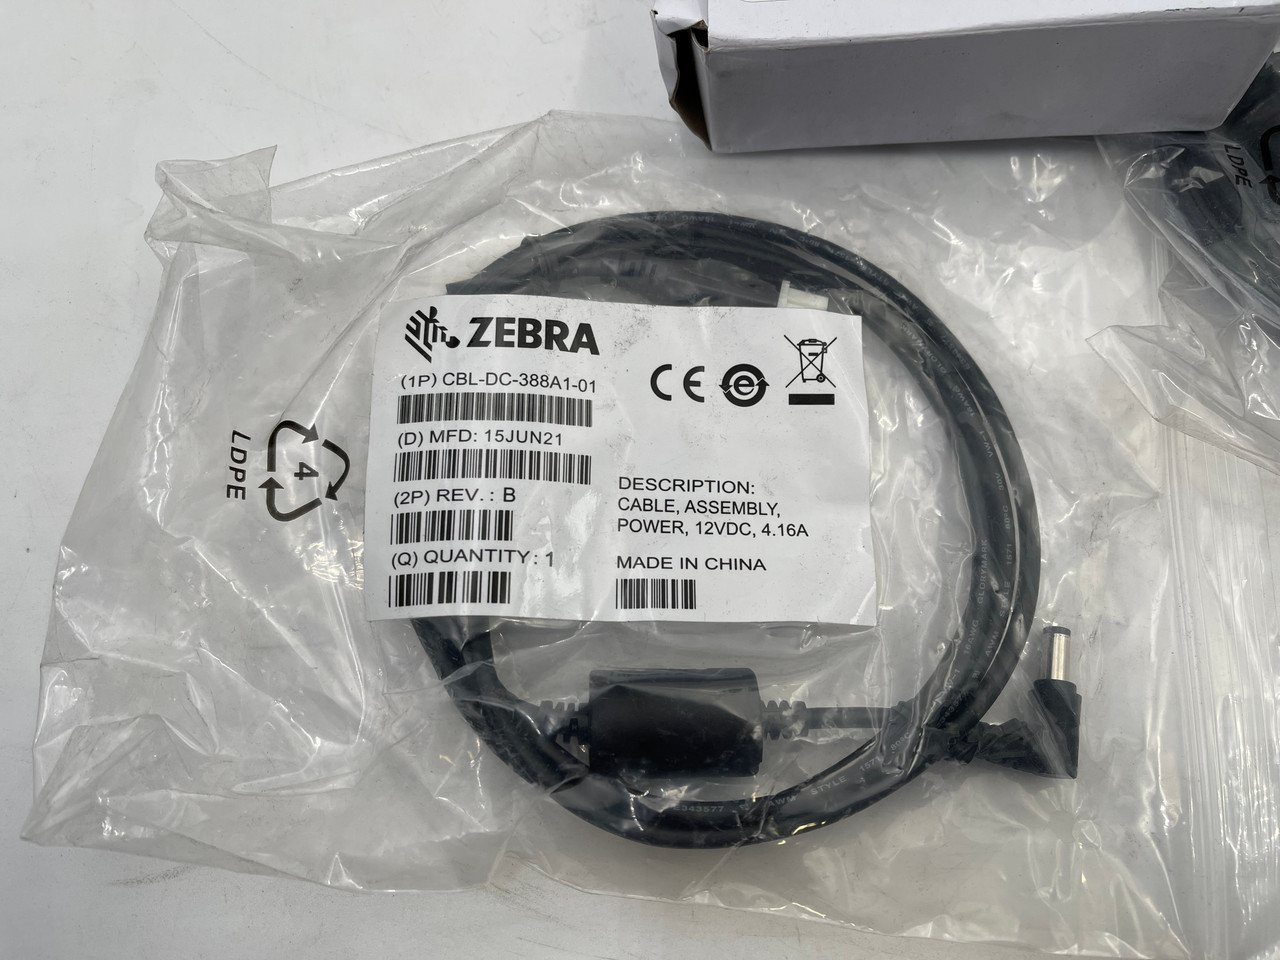 ZEBRA CRD-TC7X-SE2EPP-02 2-BAY SHARECRADLE BASE CHARGER W/ CABLES - NEW